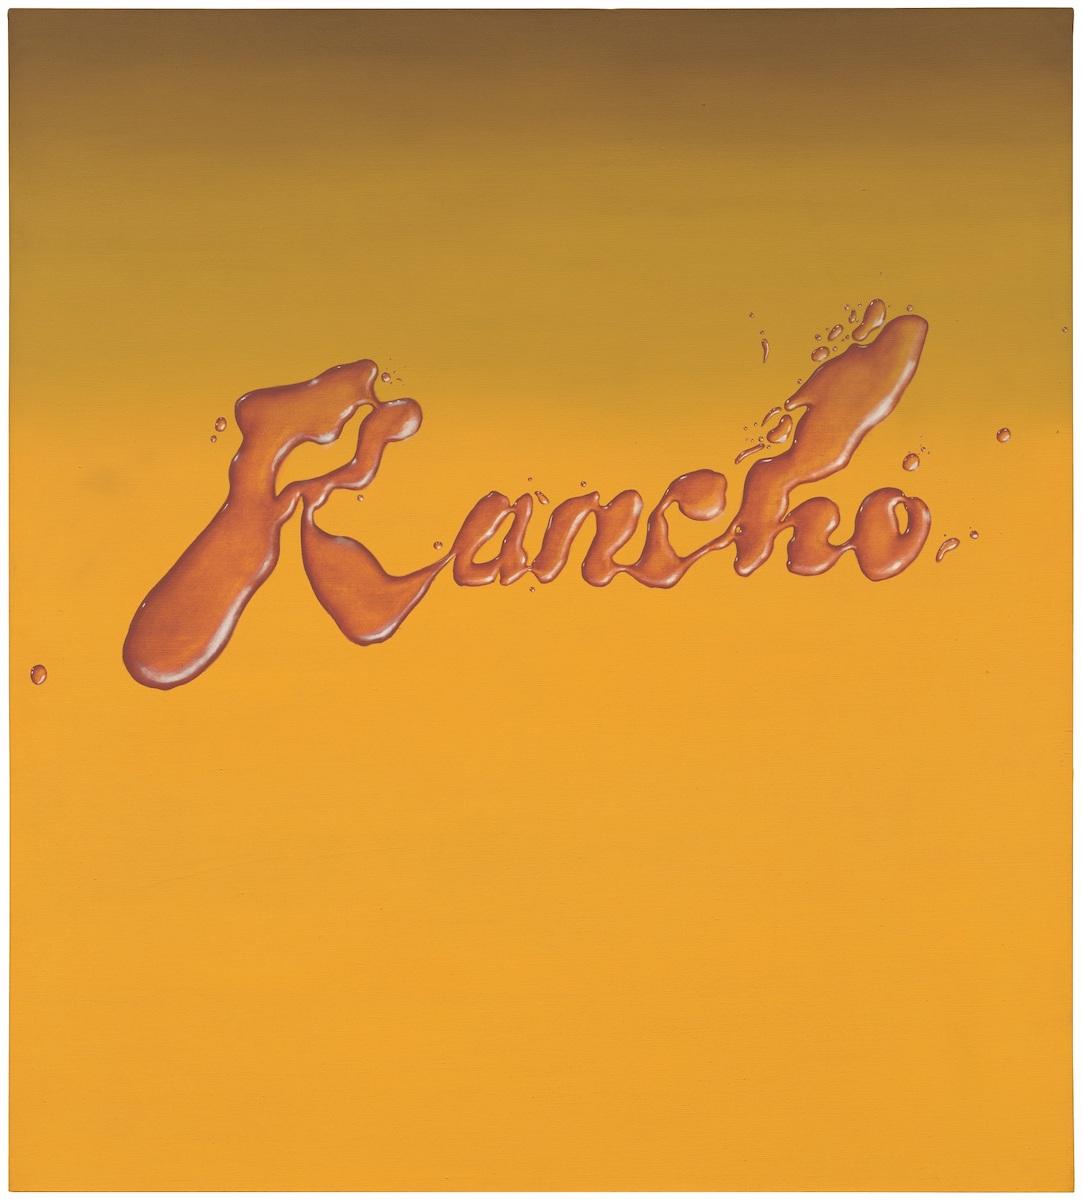 Ed Ruscha, Rancho, 1968. Oil on canvas, 60 x 54″ (152.4 x 137.2 cm). The Museum of Modern Art, New York. Gift of Steven and Alexandra Cohen. © 2023 Ed Ruscha. The Museum of Modern Art, New York, Department of Imaging Services, photo Emile Askey